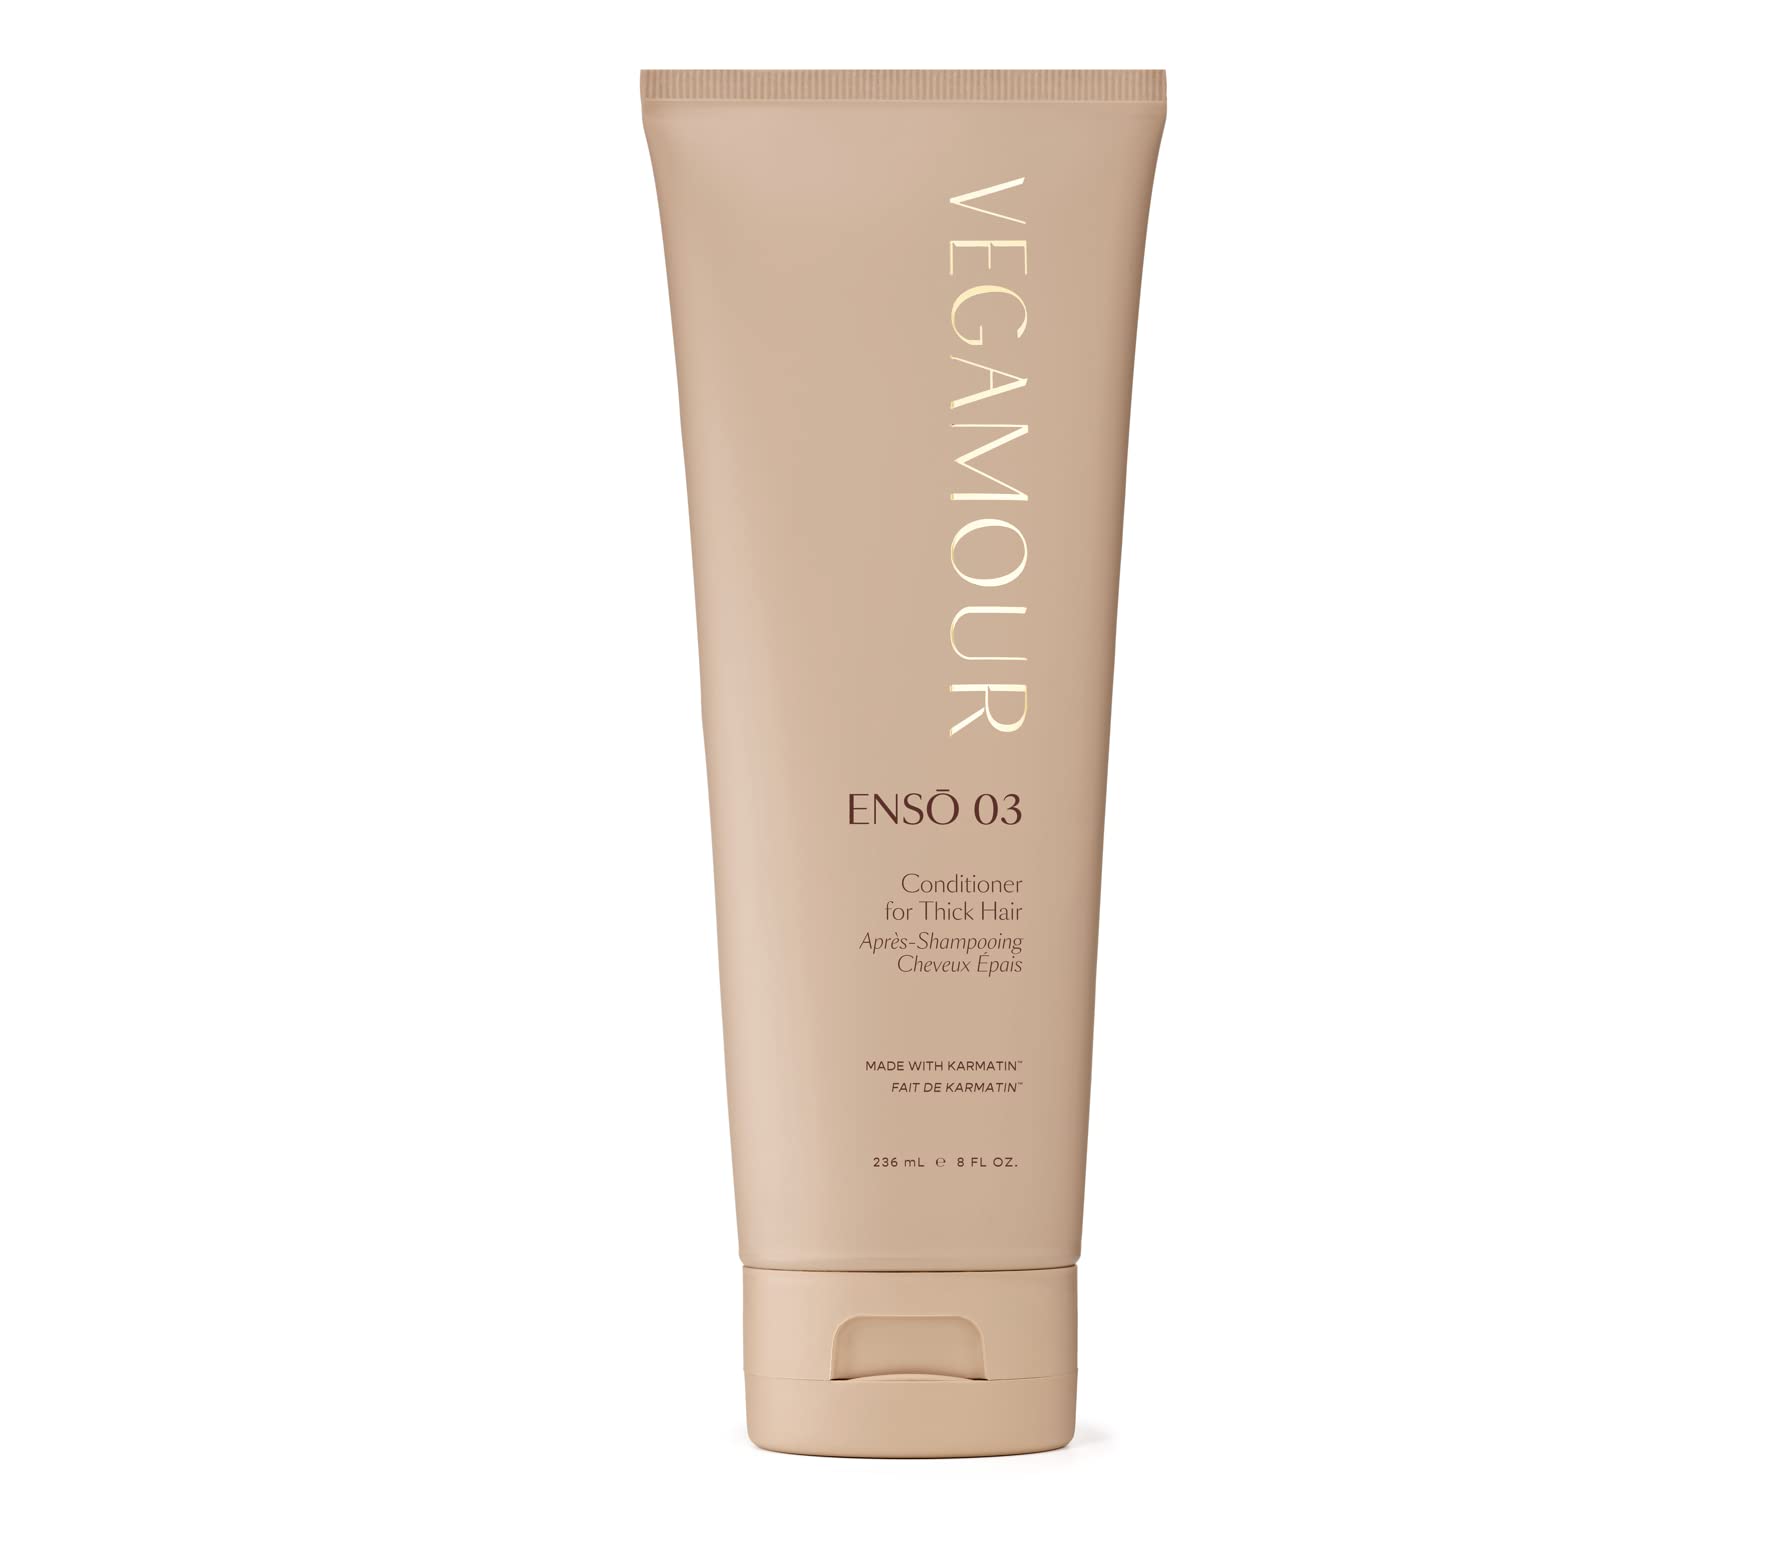 VEGAMOUR ENSO 03 Conditioner for Thick Hair